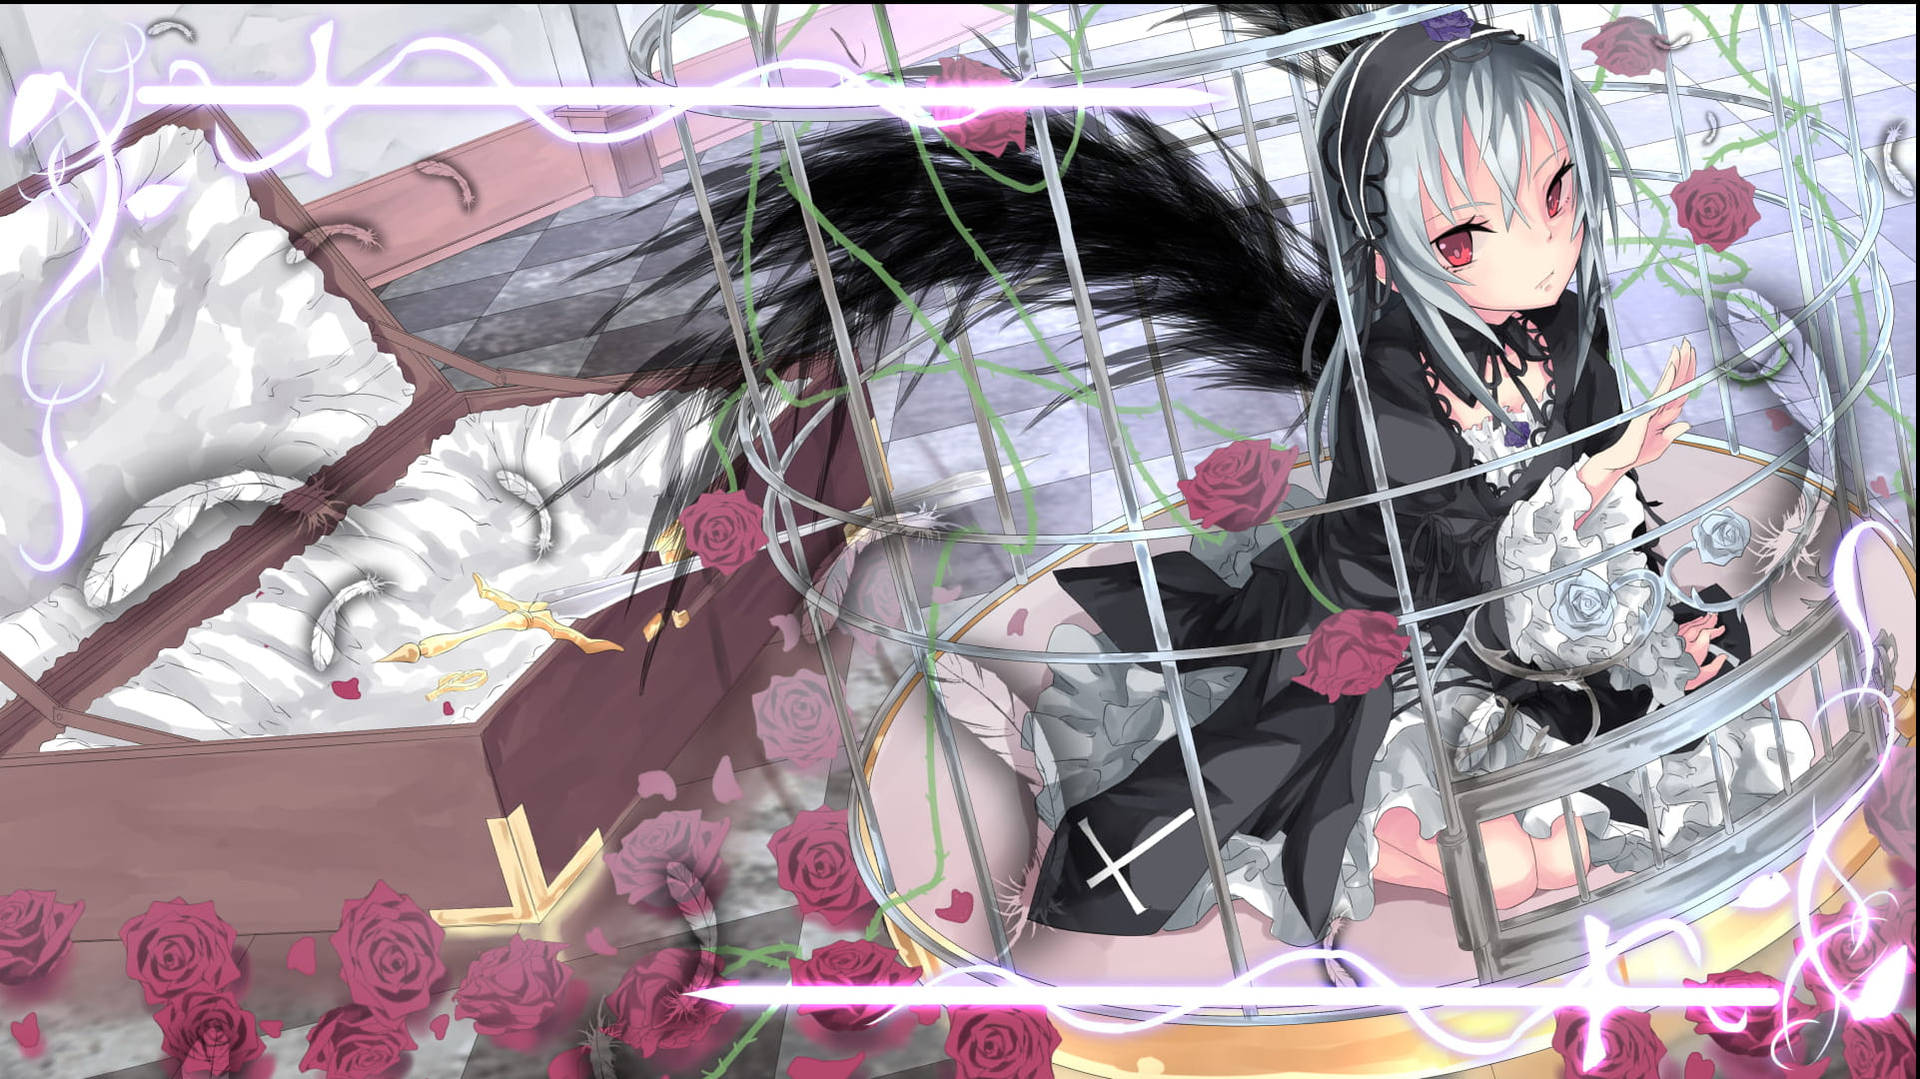 Goth Lolita Anime In Cage Background